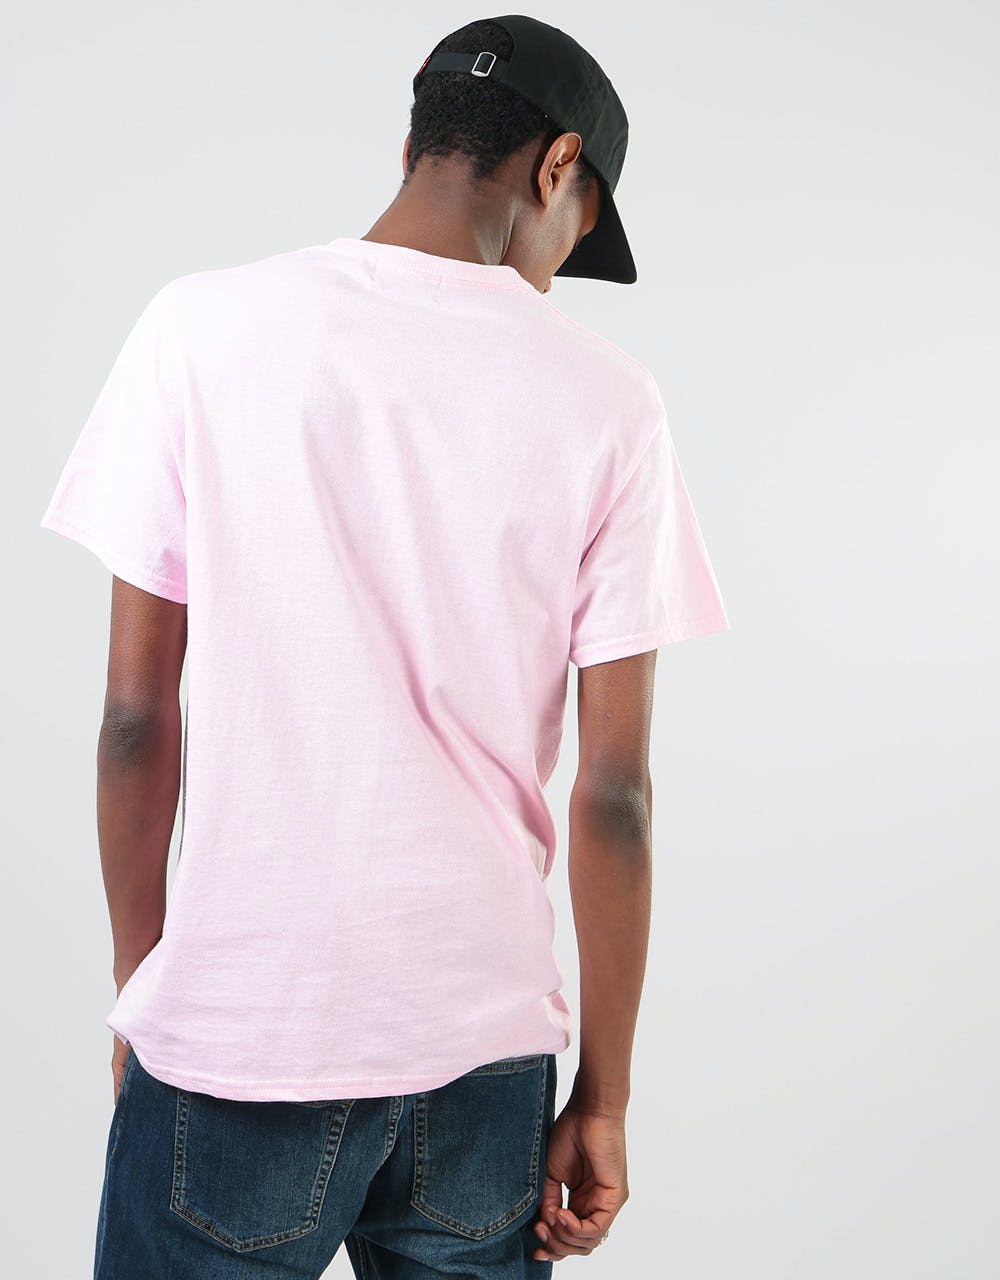 Route One Embroidered Logo T-Shirt - Light Pink